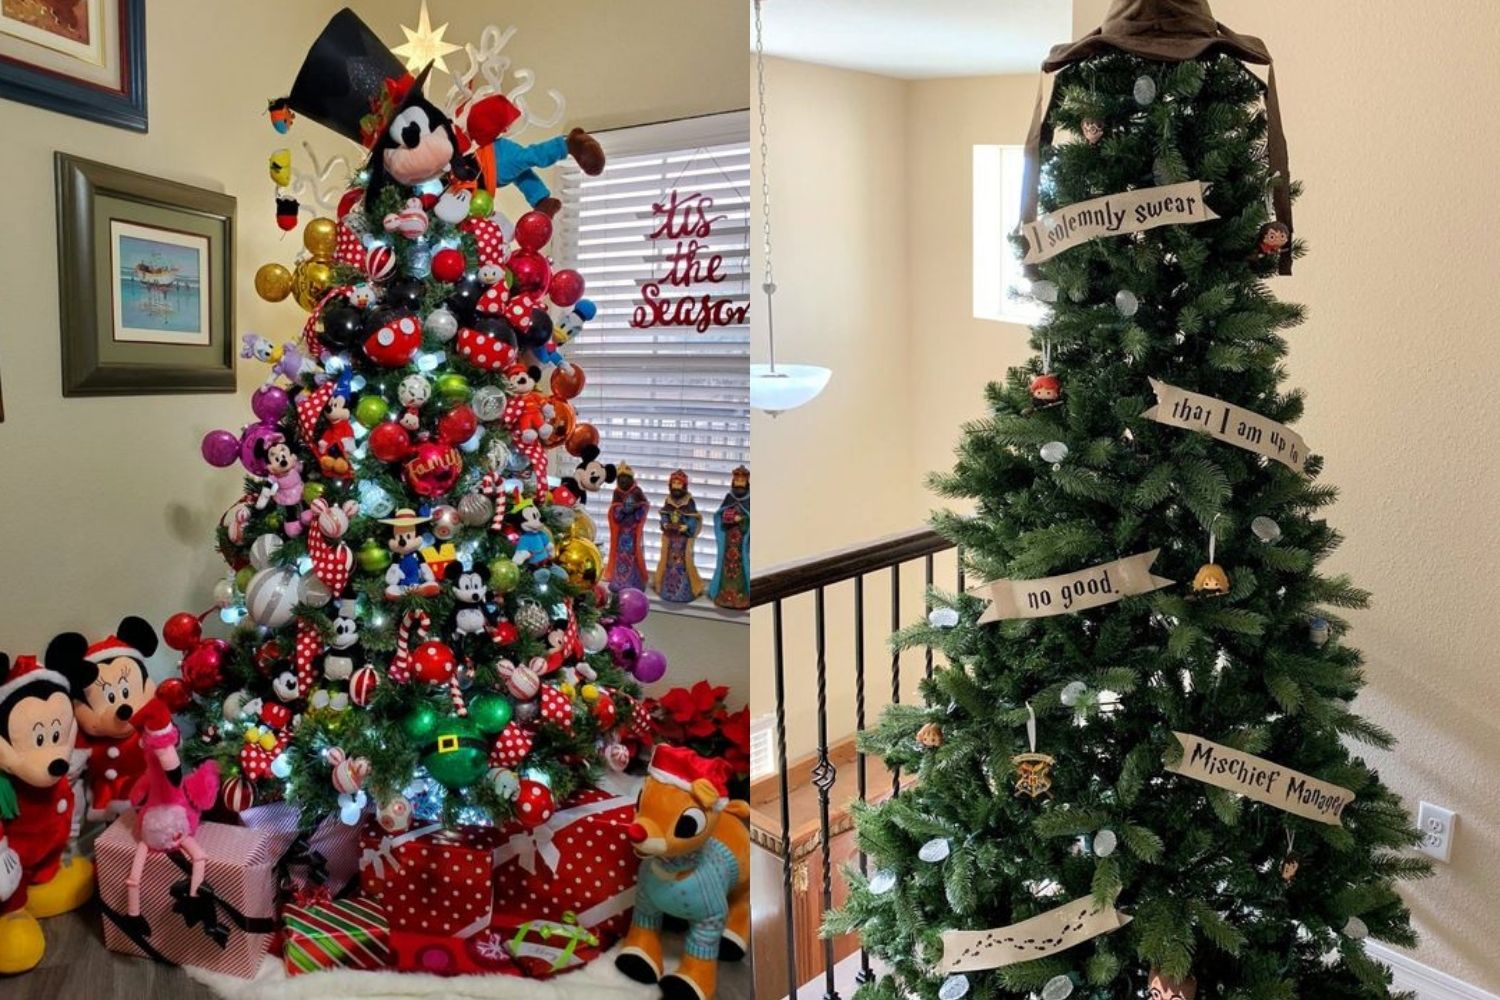 These moviethemed Christmas trees are going viral Better Homes and